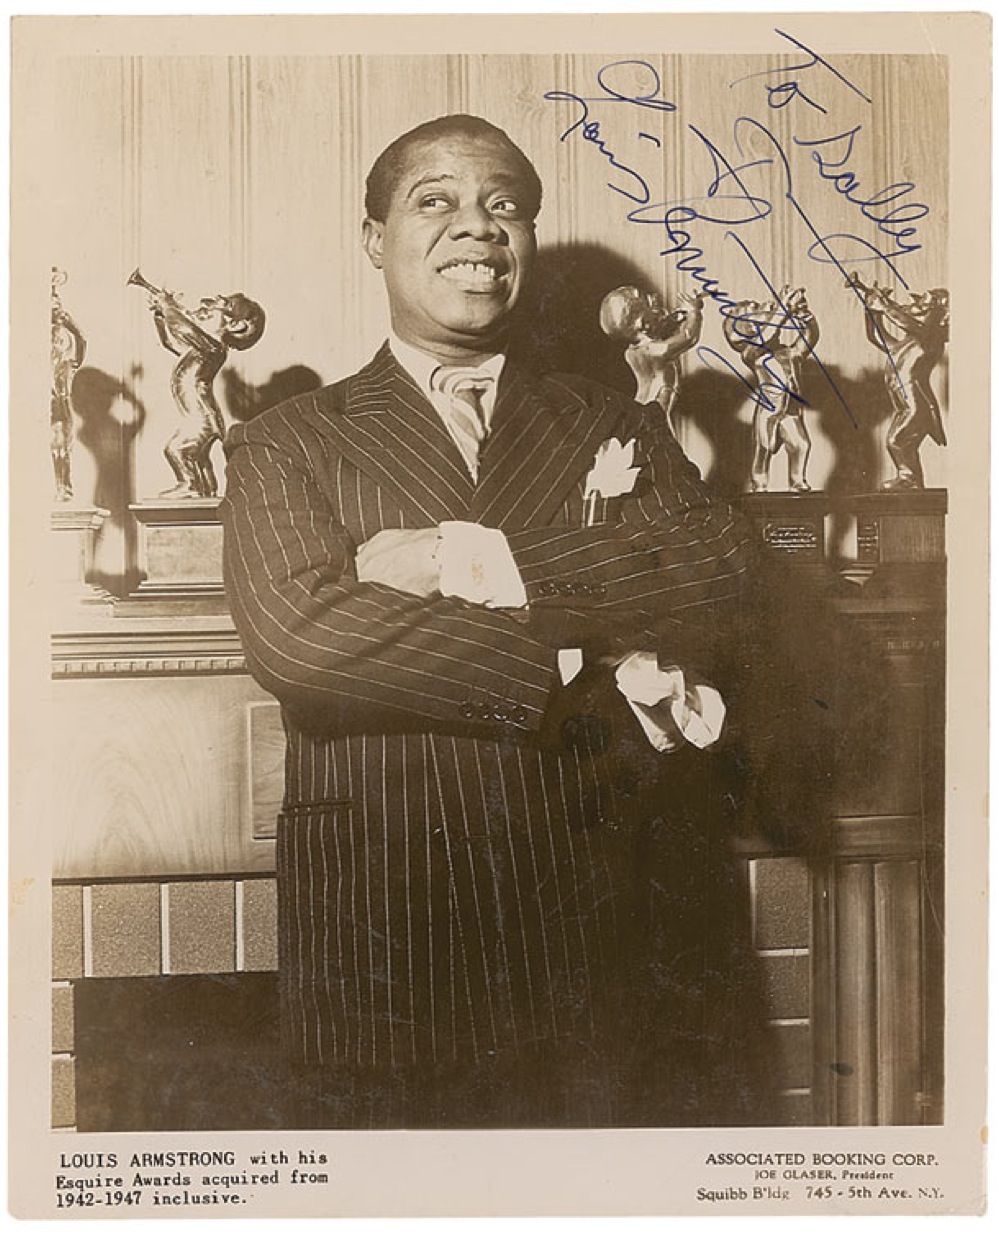 Lot #732 Louis Armstrong